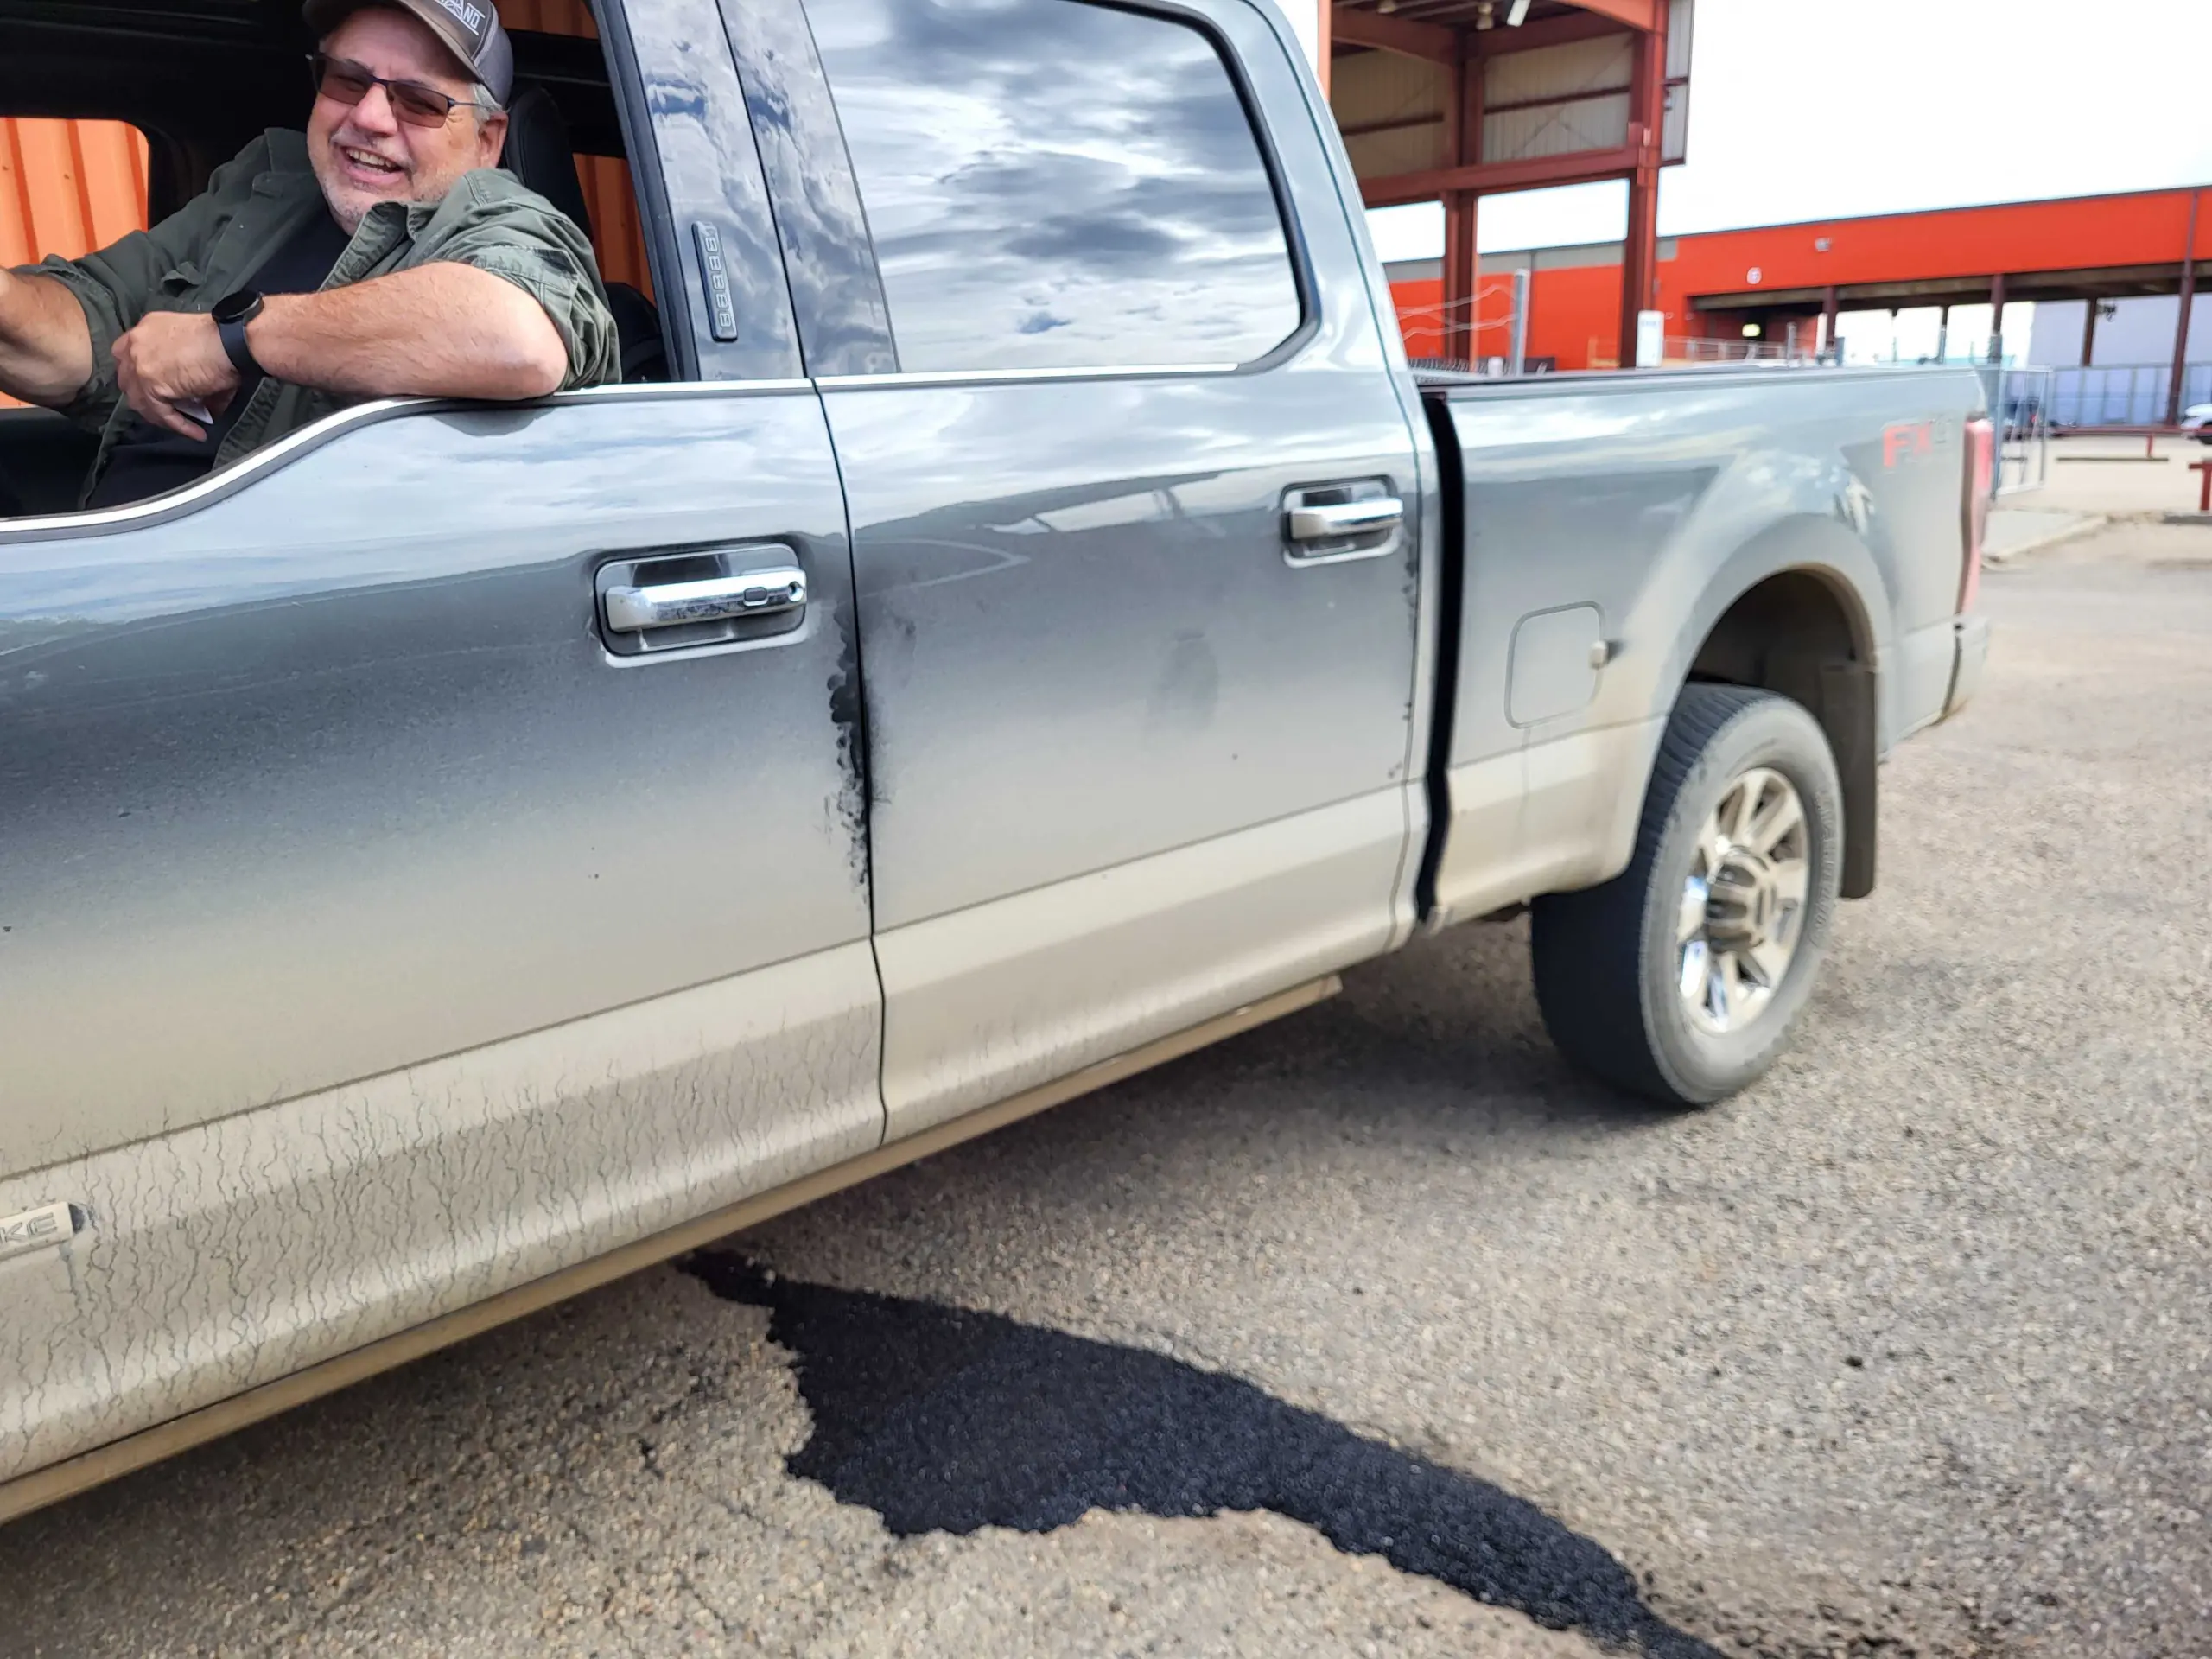 logistics and warehouse manager drives his Ford F-250 truck over a pothole filled with cold-patch from modern